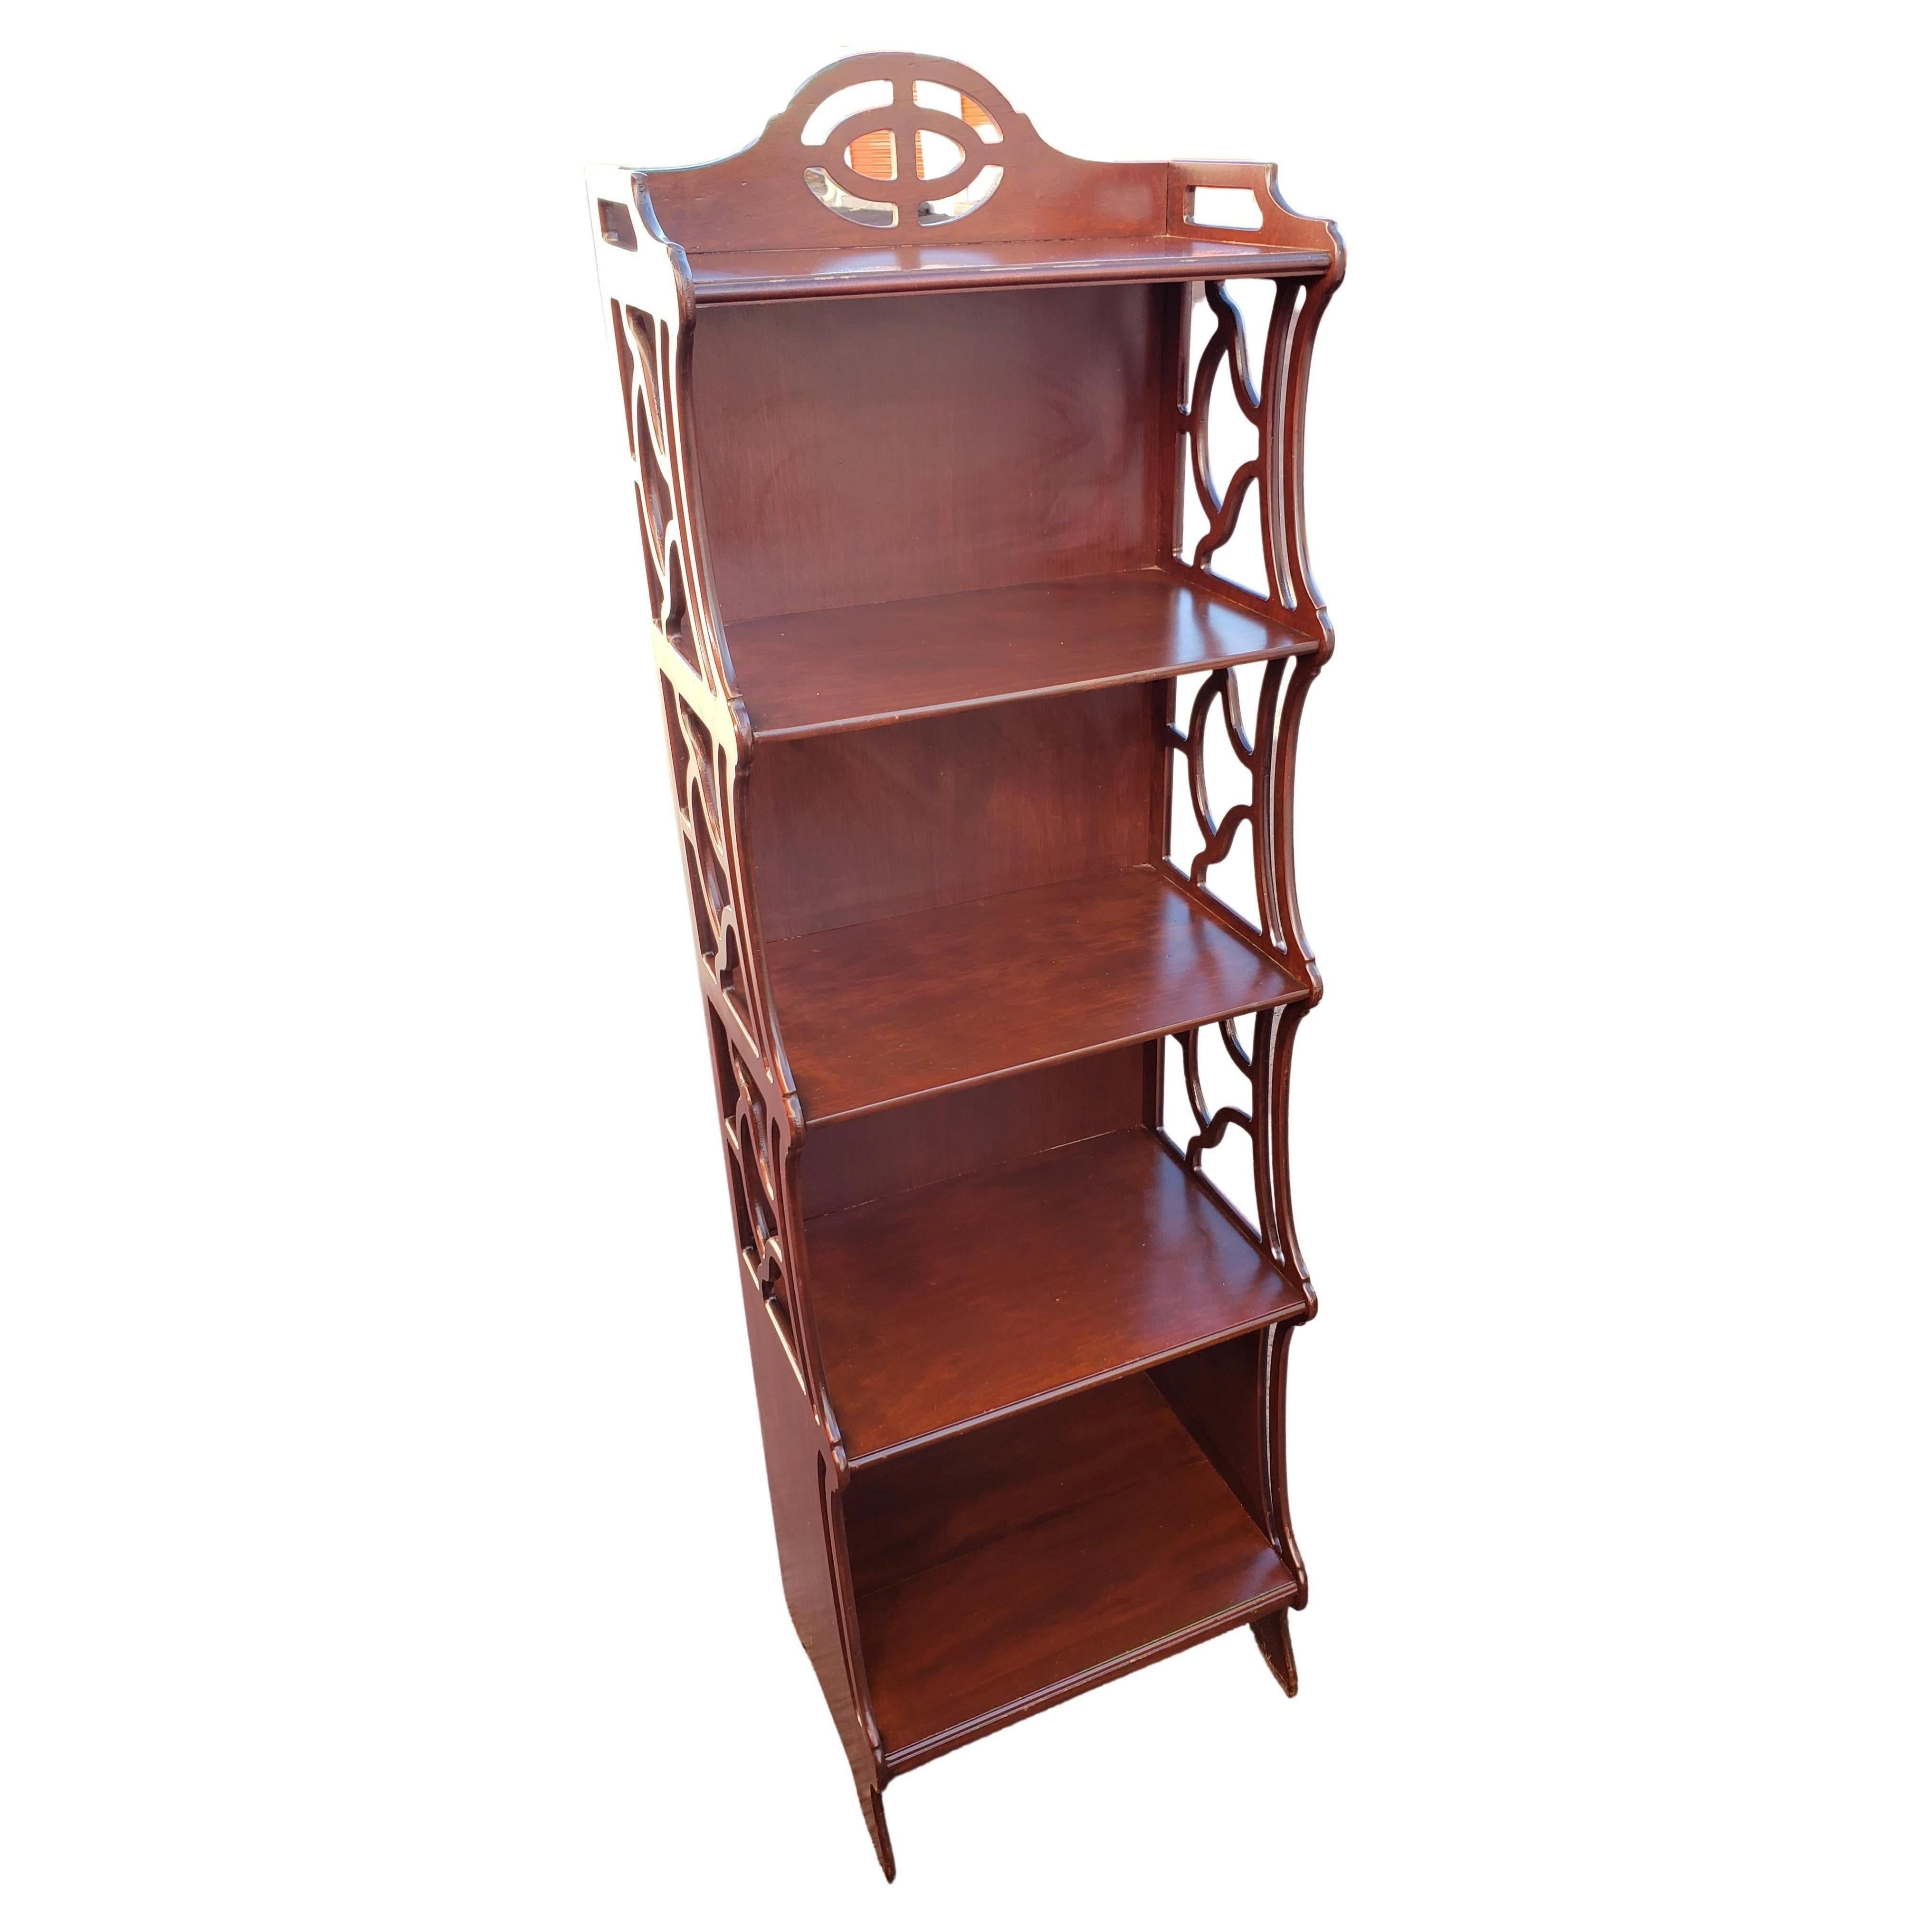 Very rare Lewis Butler Chippendale display shelf, Etagere, bookshelf, Circa 1940s. Just great for any room or decor in your home.. Measures 16